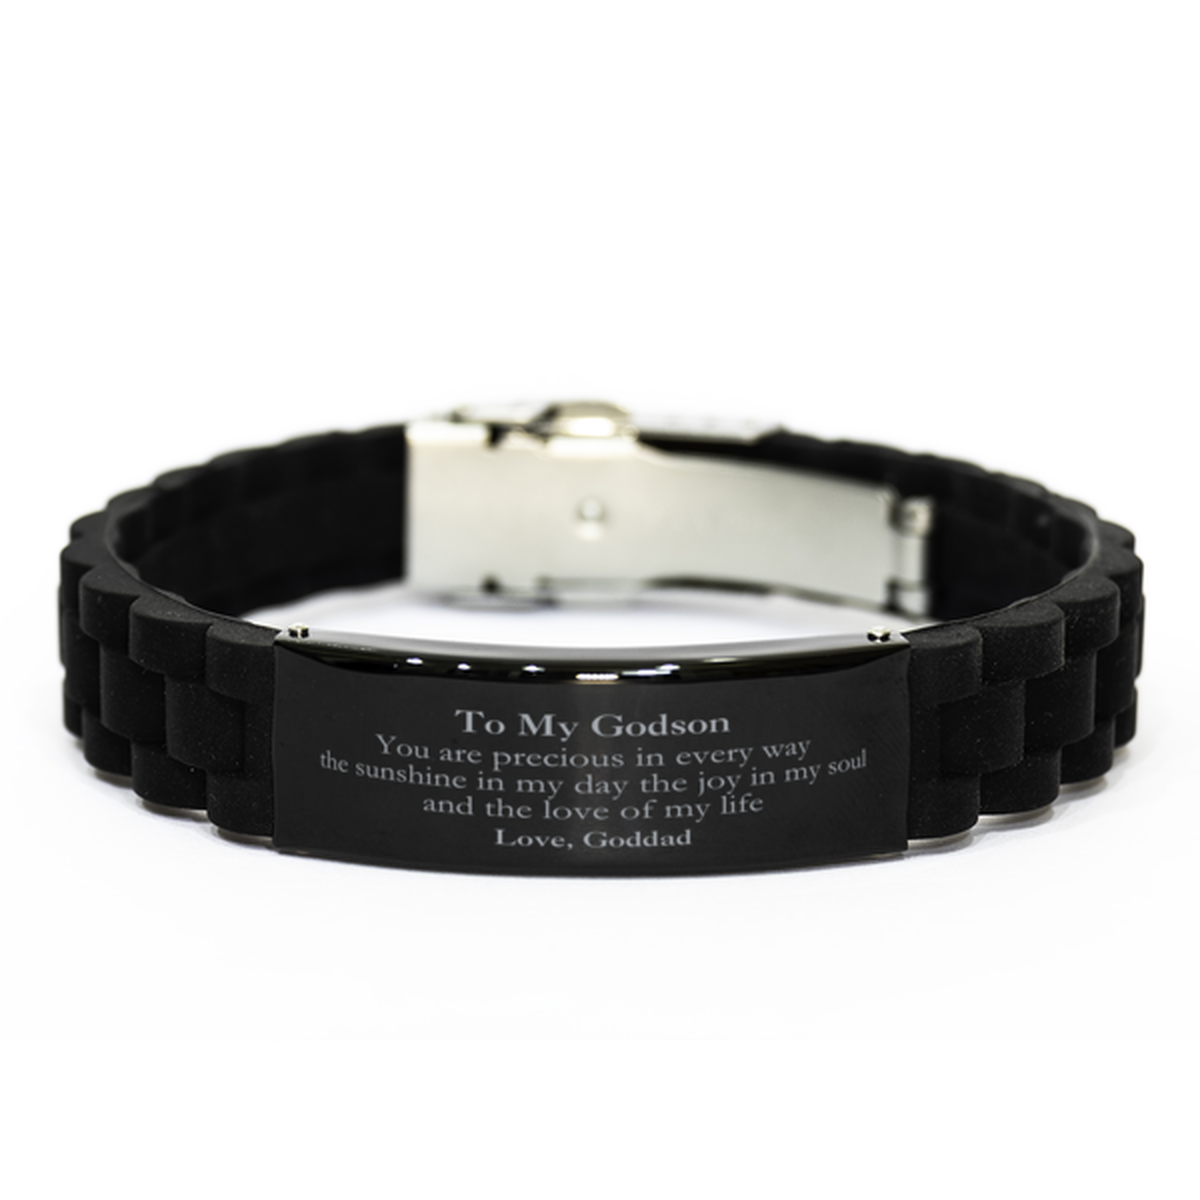 Graduation Gifts for Godson Black Glidelock Clasp Bracelet Present from Goddad, Christmas Godson Birthday Gifts Godson You are precious in every way the sunshine in my day. Love, Goddad